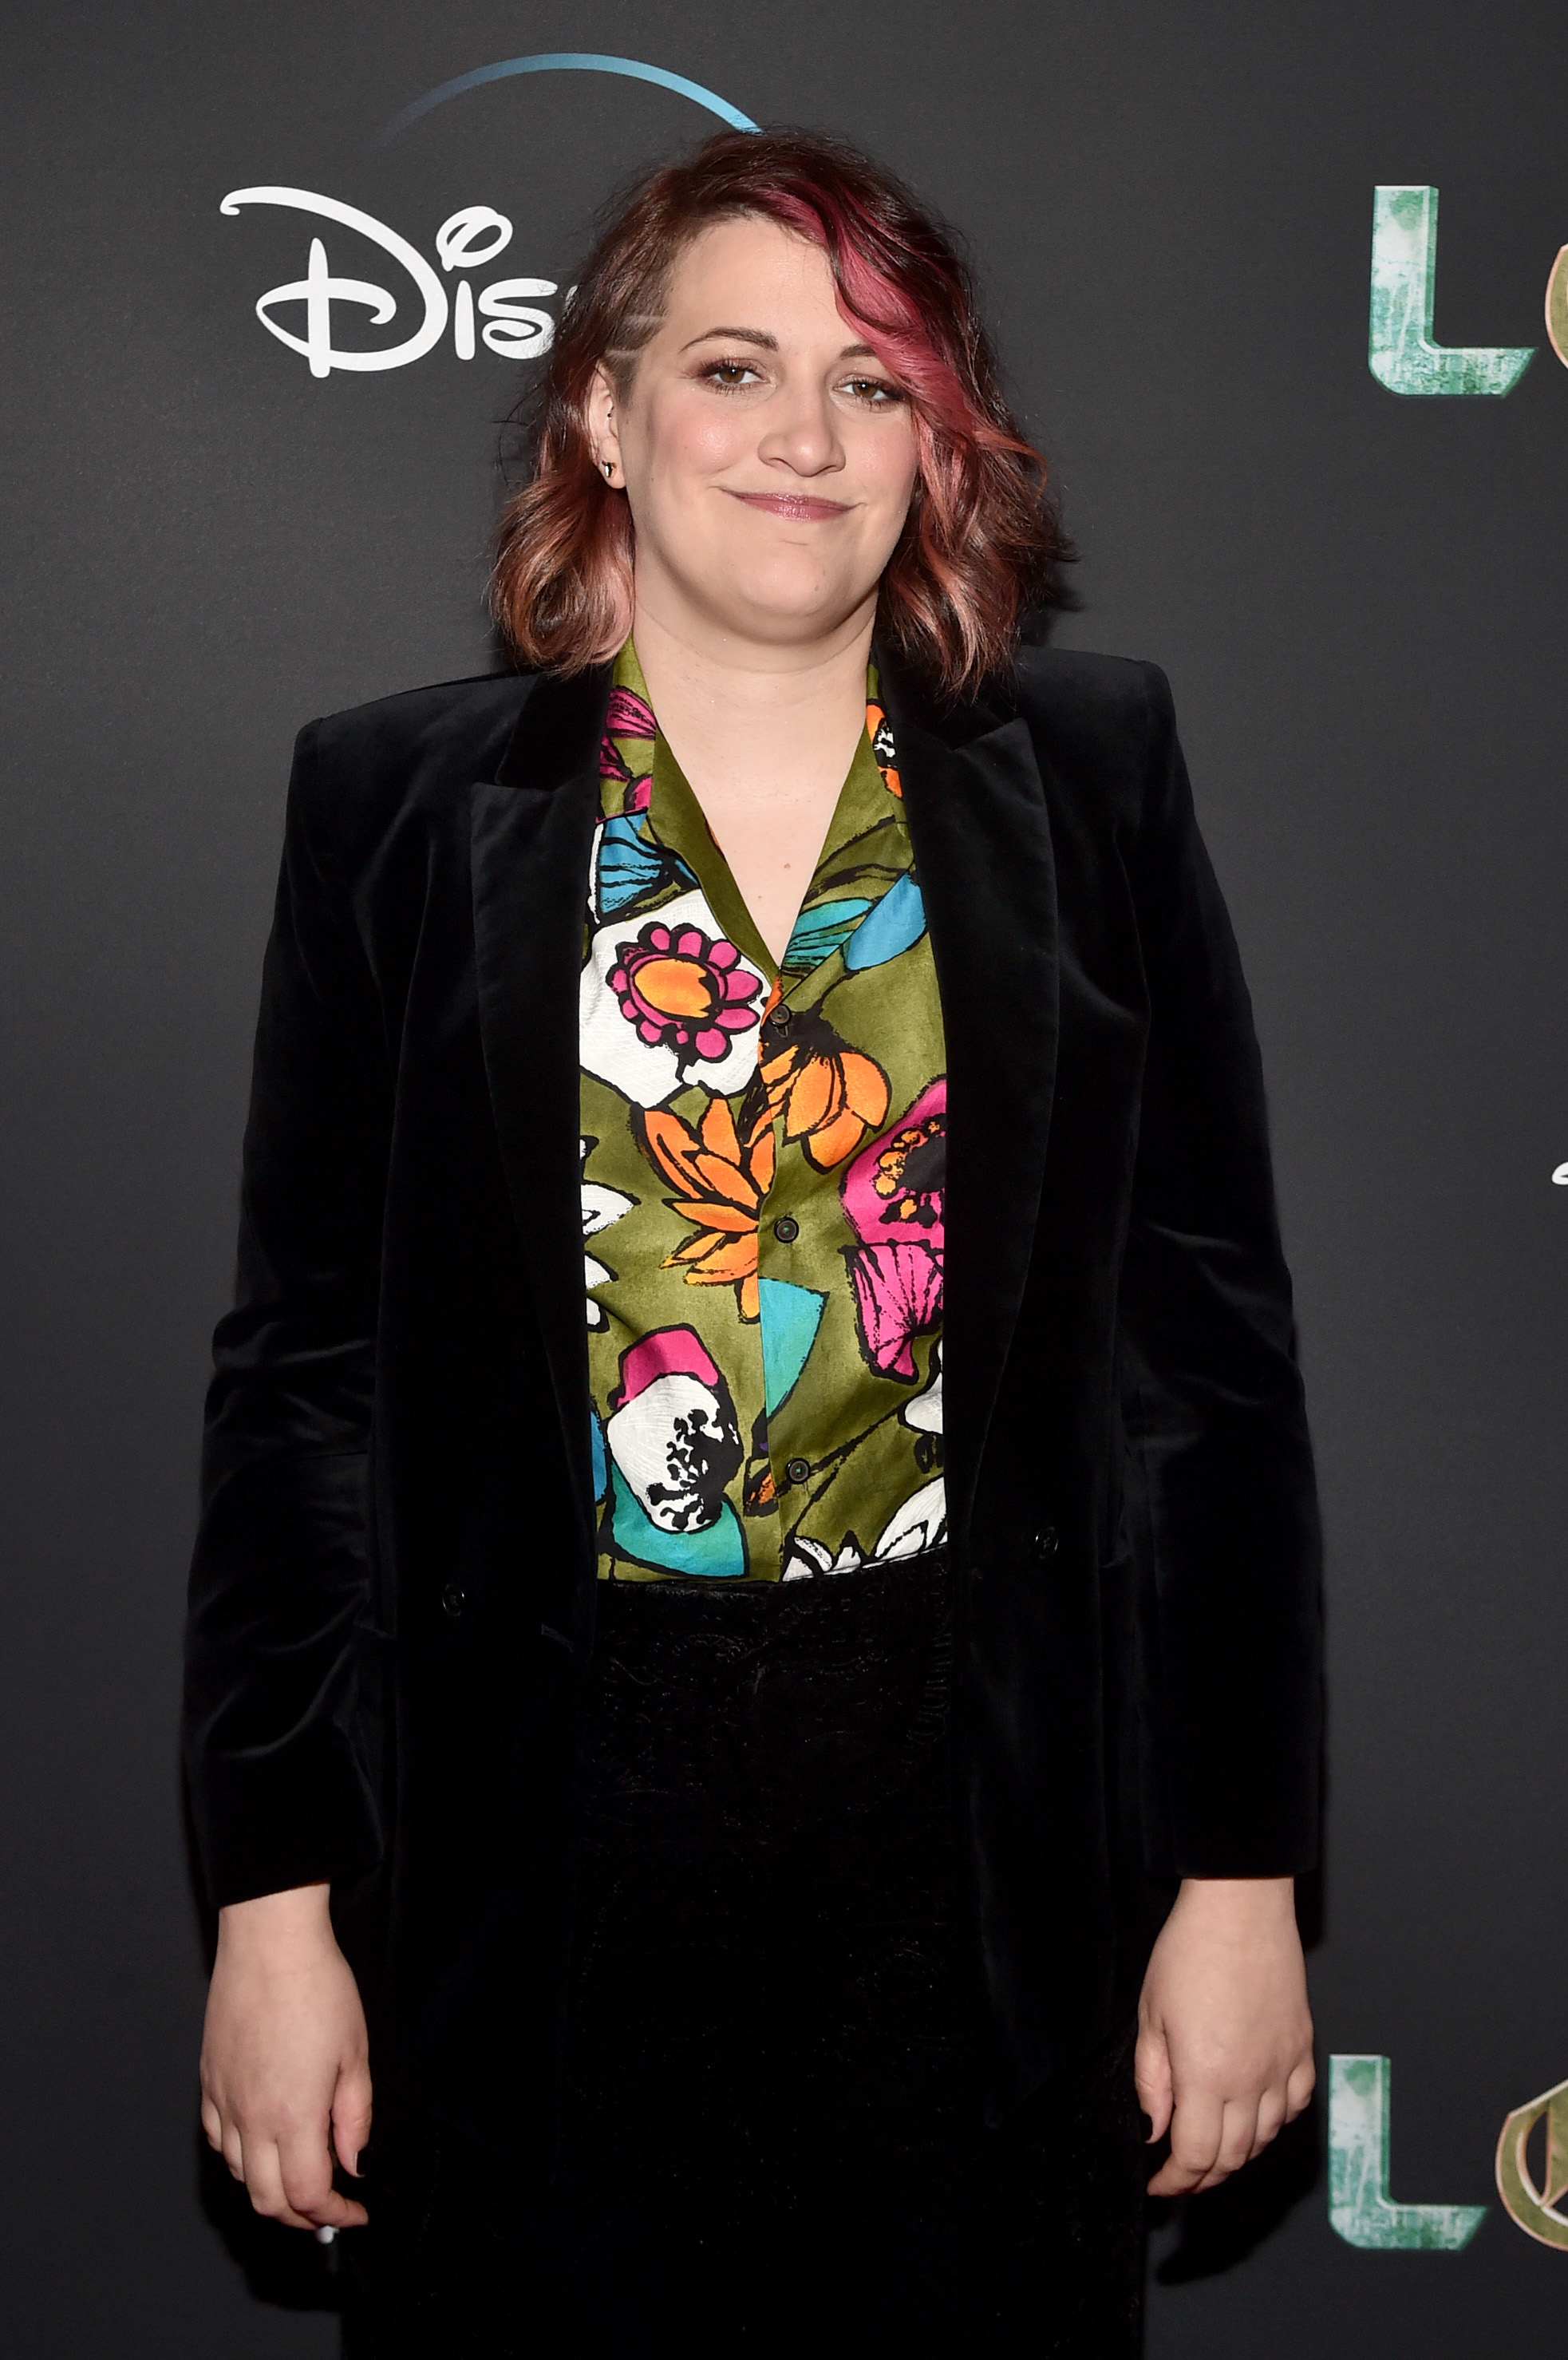 Kate Herron at an event wearing a floral blouse and a blazer